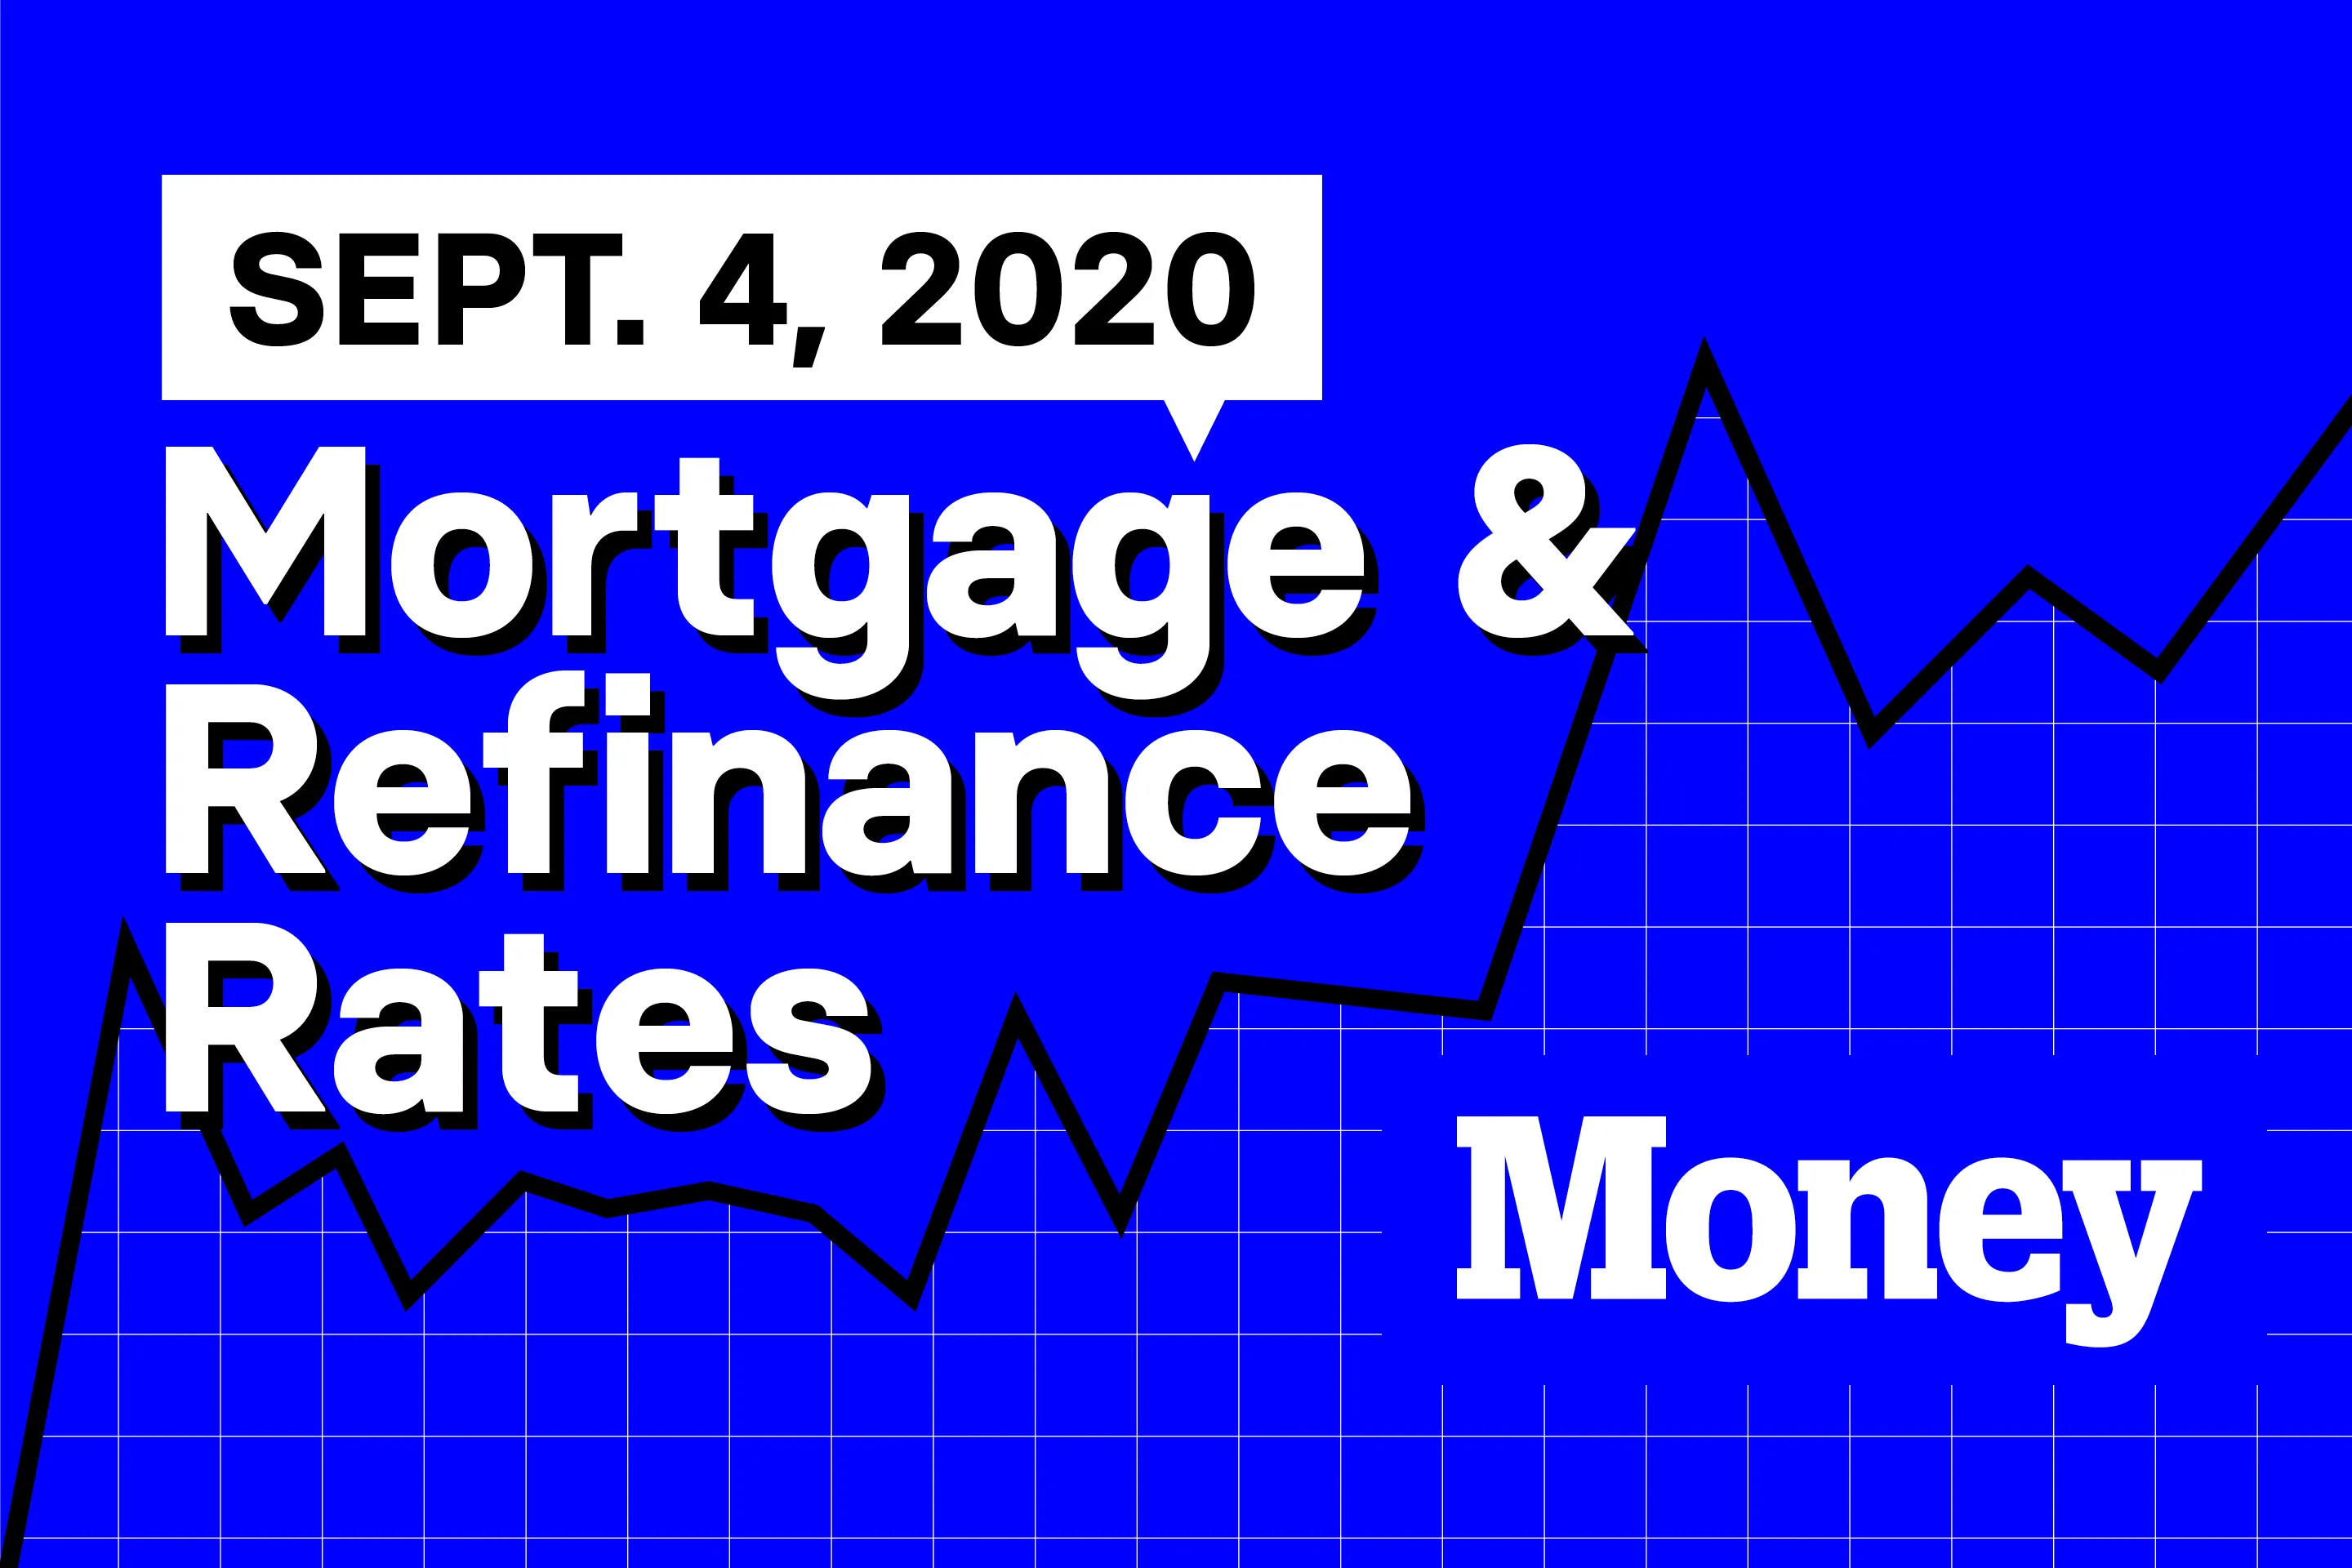 Here Are Today's Best Mortgage & Refinance Rates for September 4, 2020